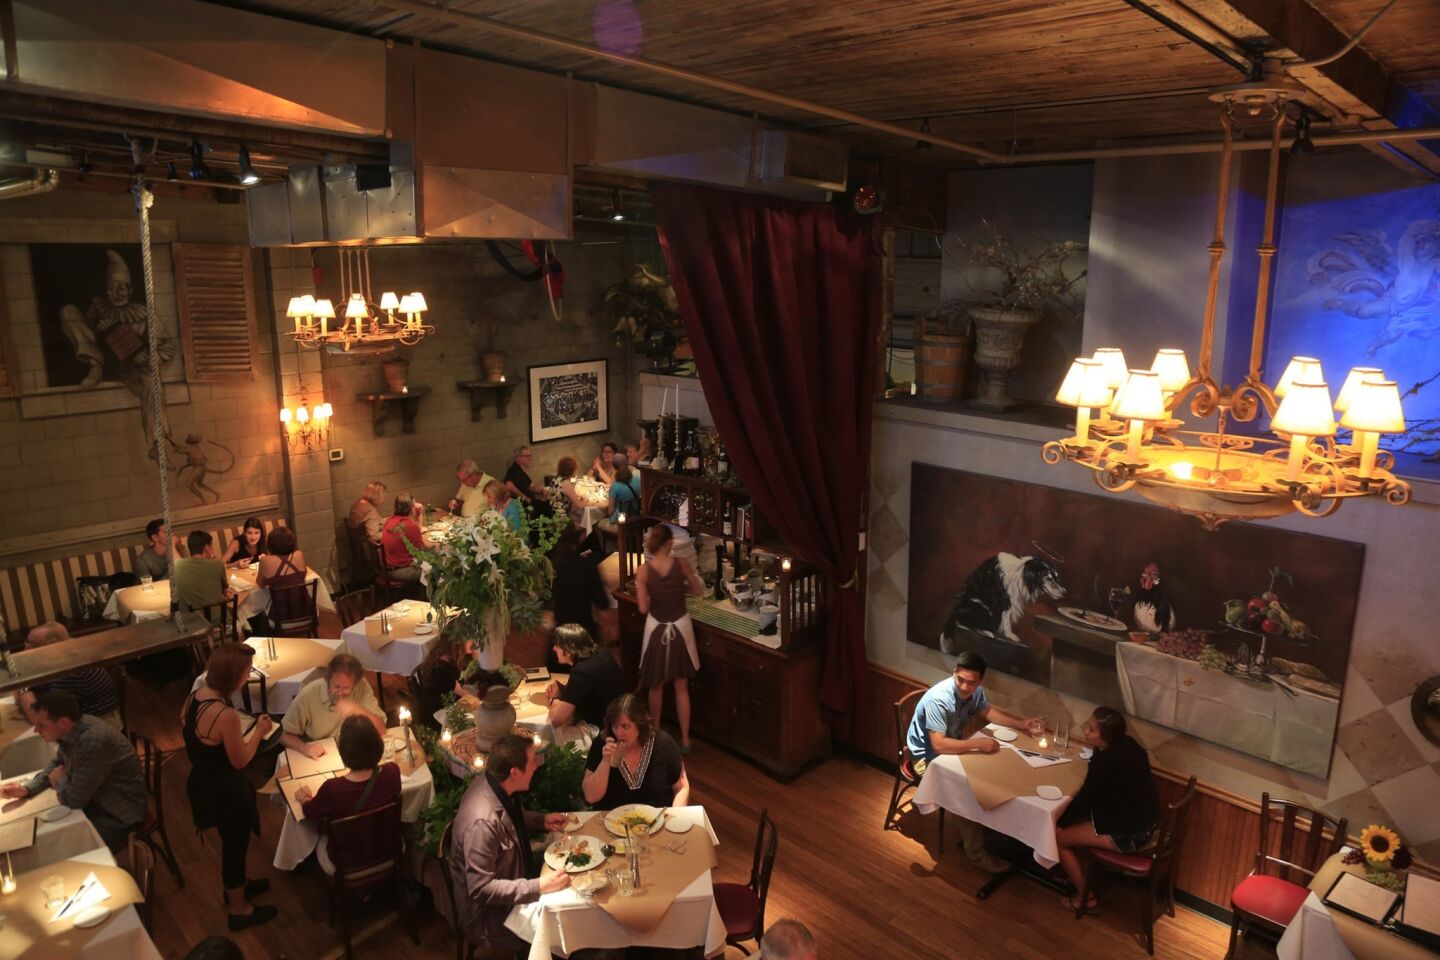 The Pink Door in Pike Place Market is an upscale restaurant serving Italian food.